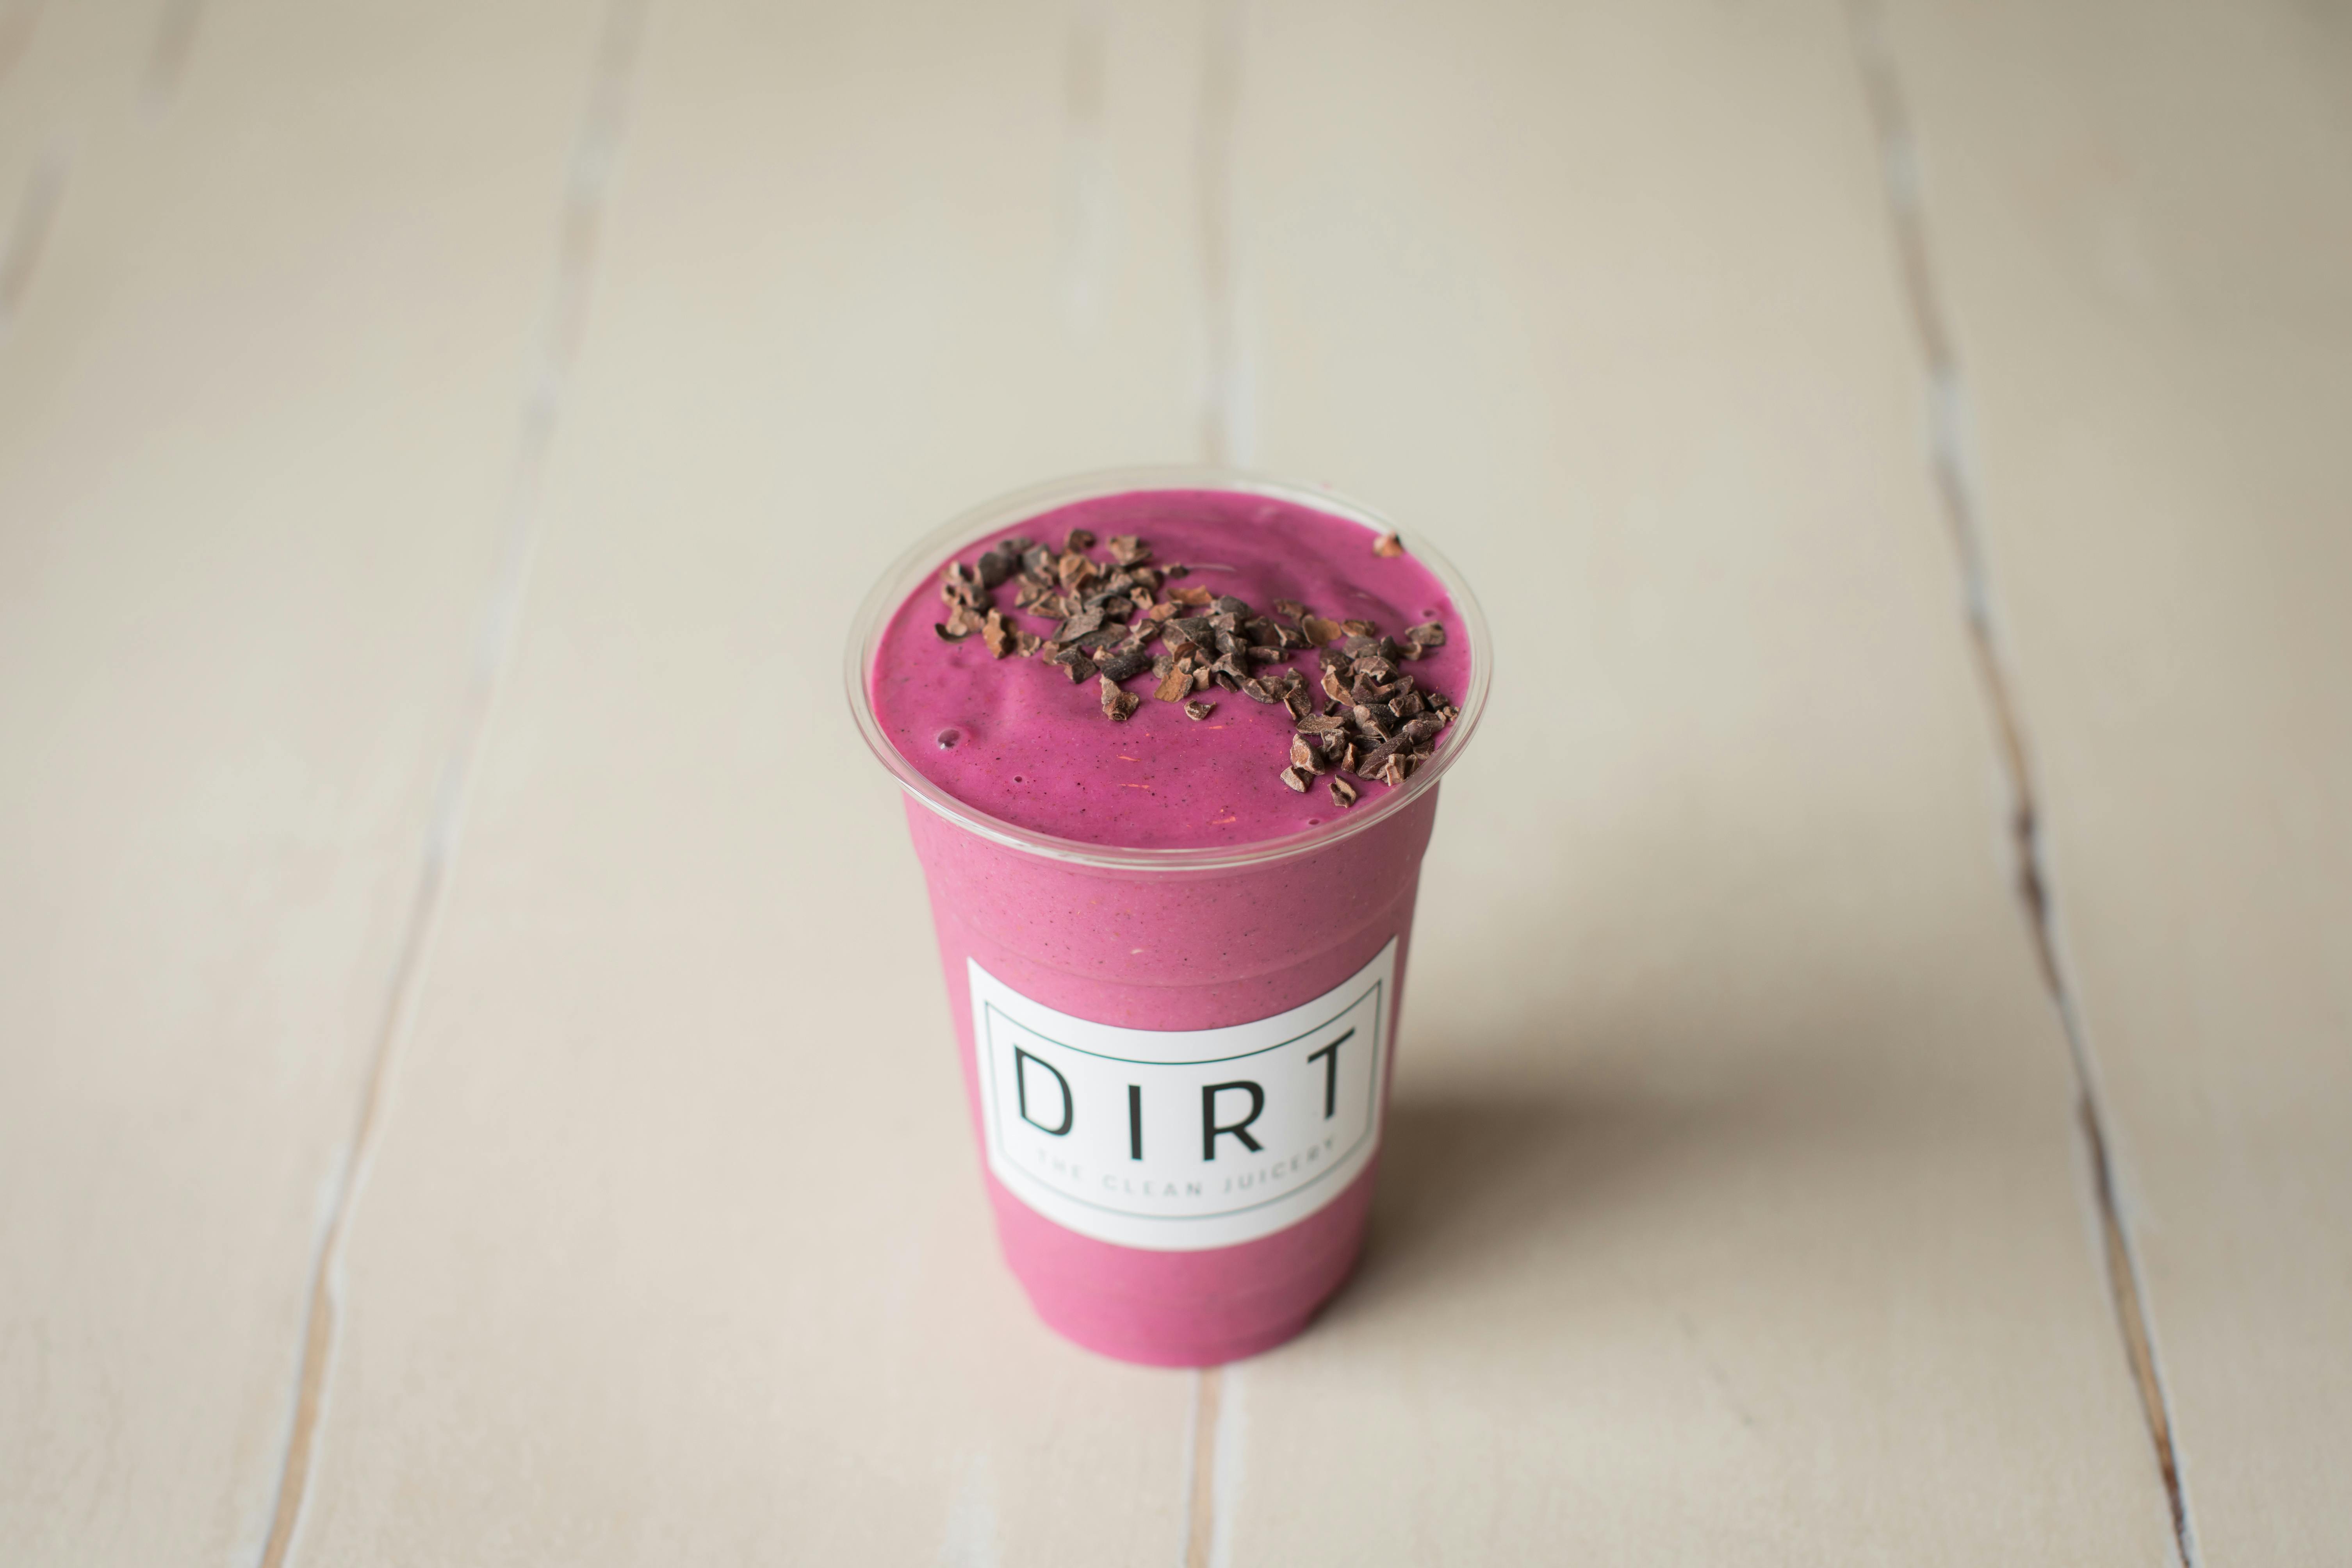 Pink Dragon Smoothie from Dirt Juicery - Bay Park Square in Green Bay, WI